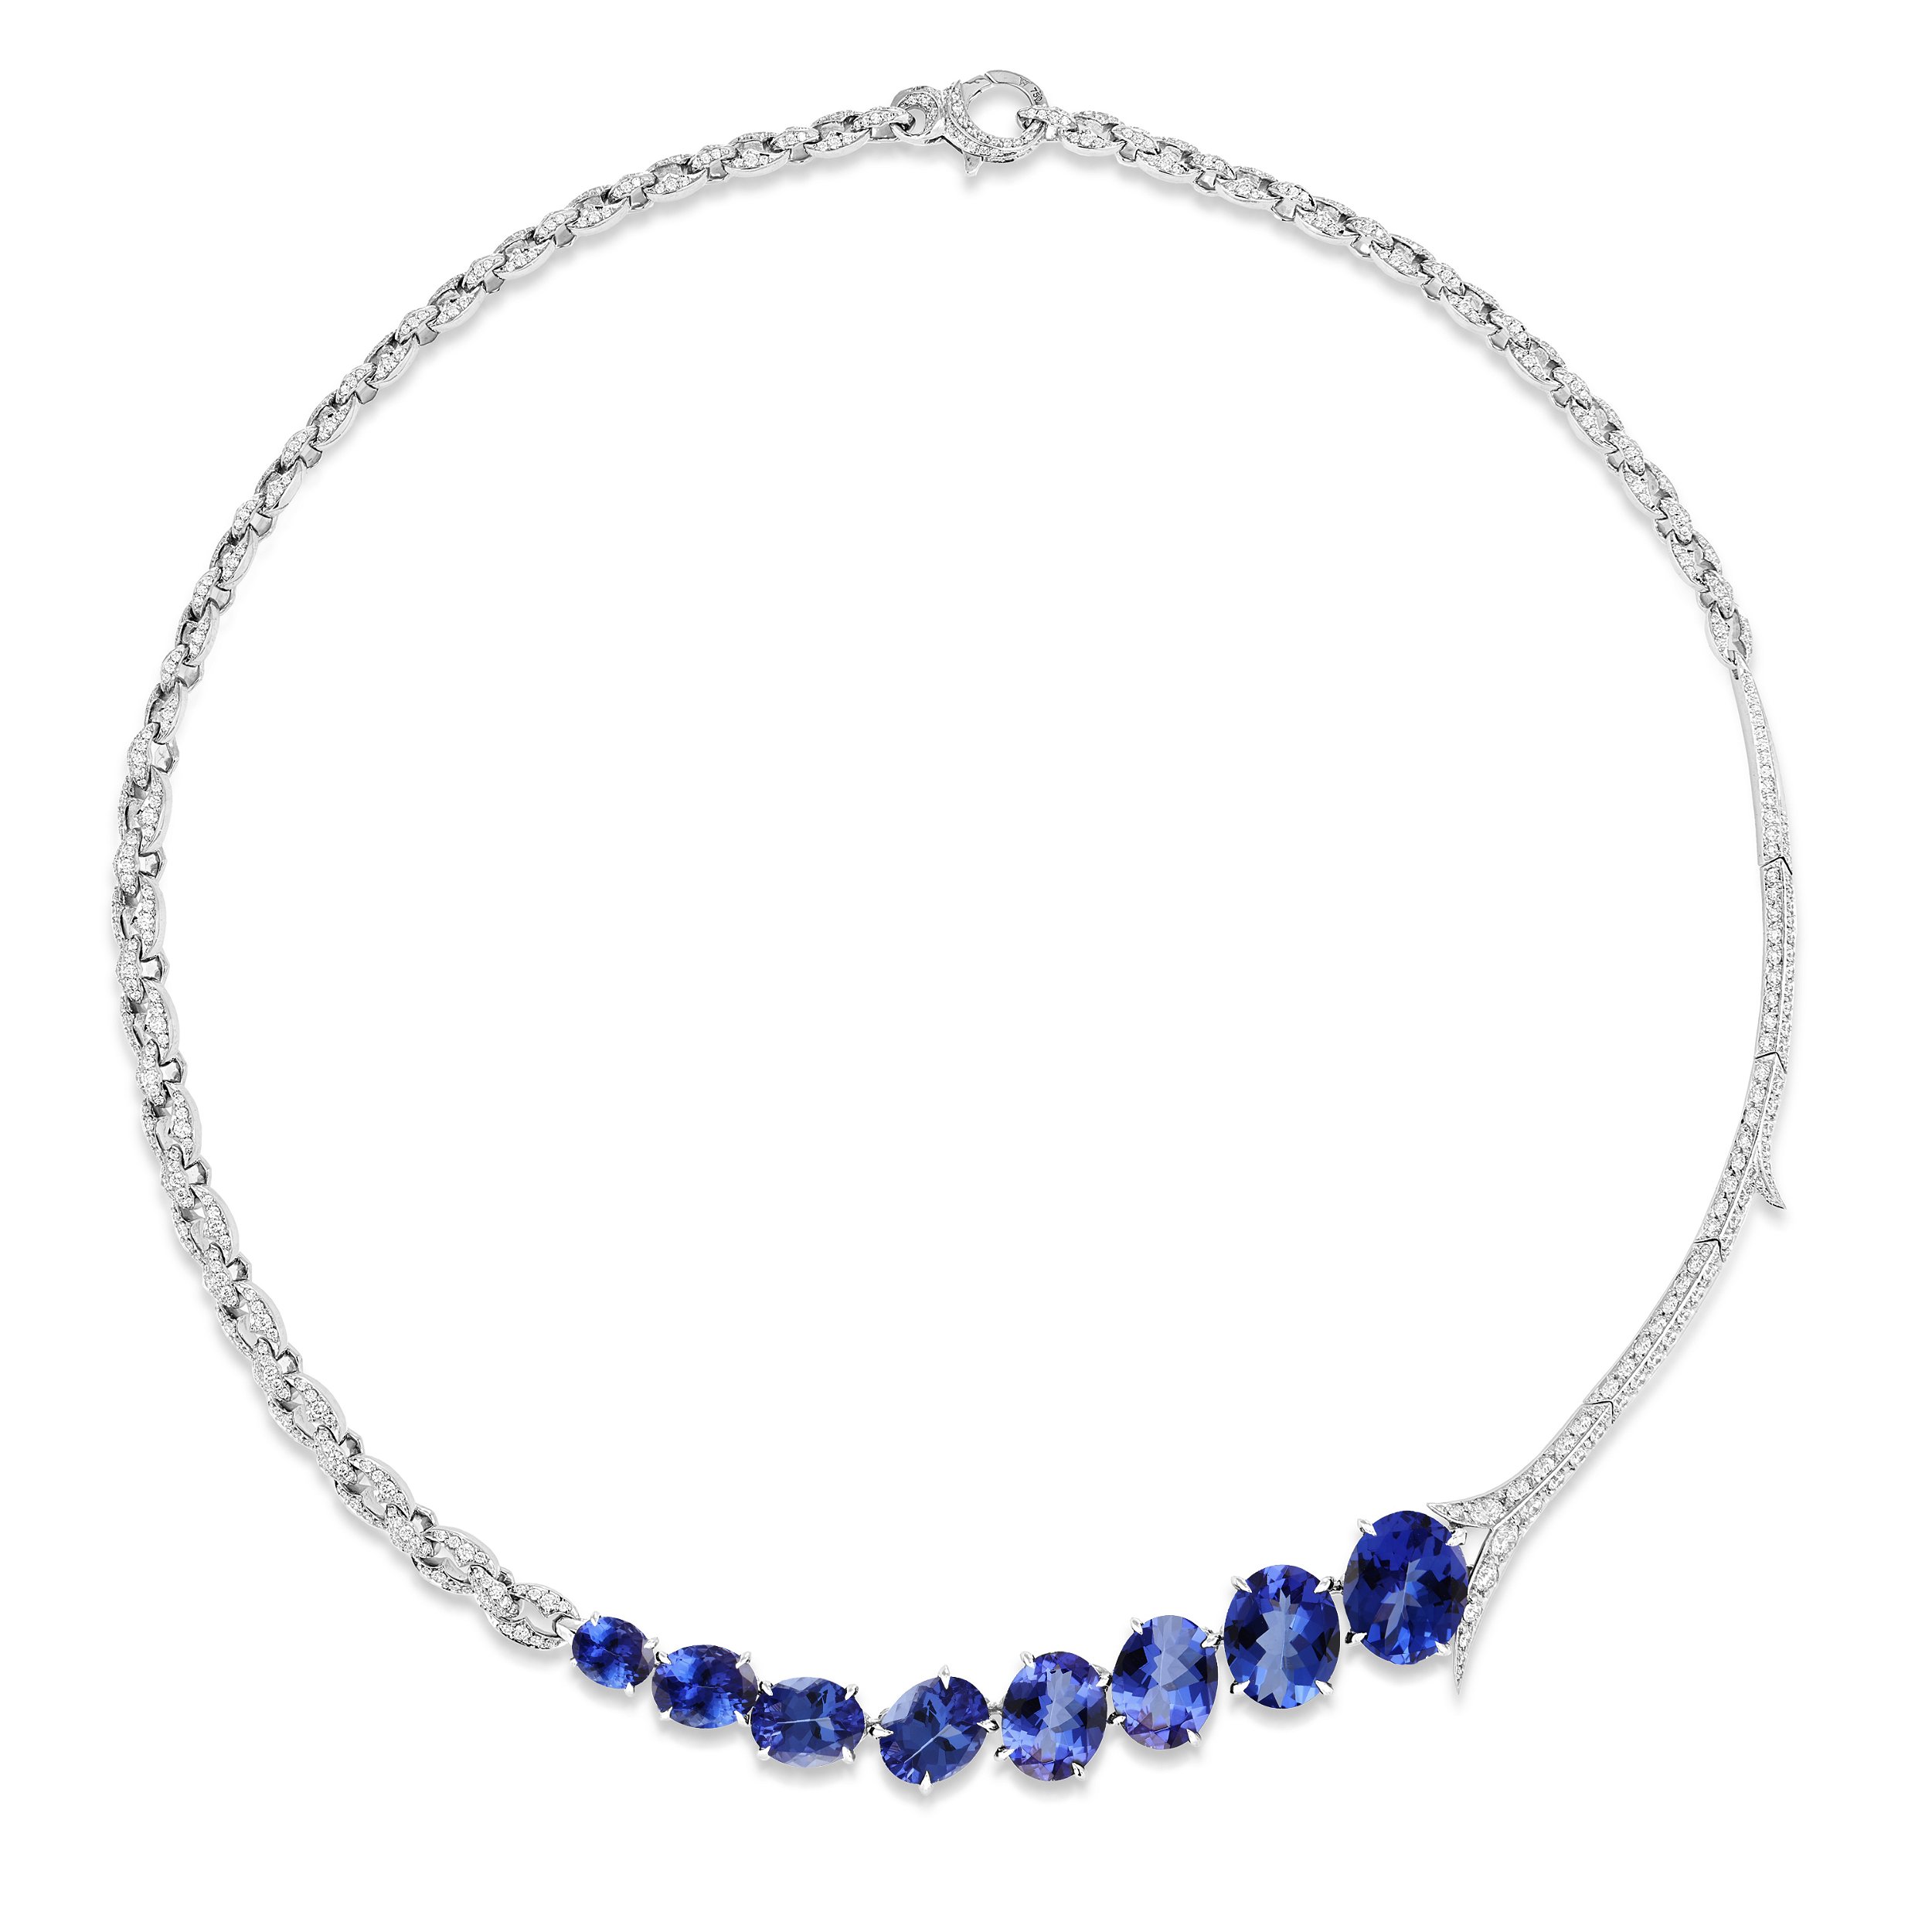 Thorn Embrace Forbidden Fruit Collar Necklace with Tanzanite and White Diamonds in 18kt White Gold